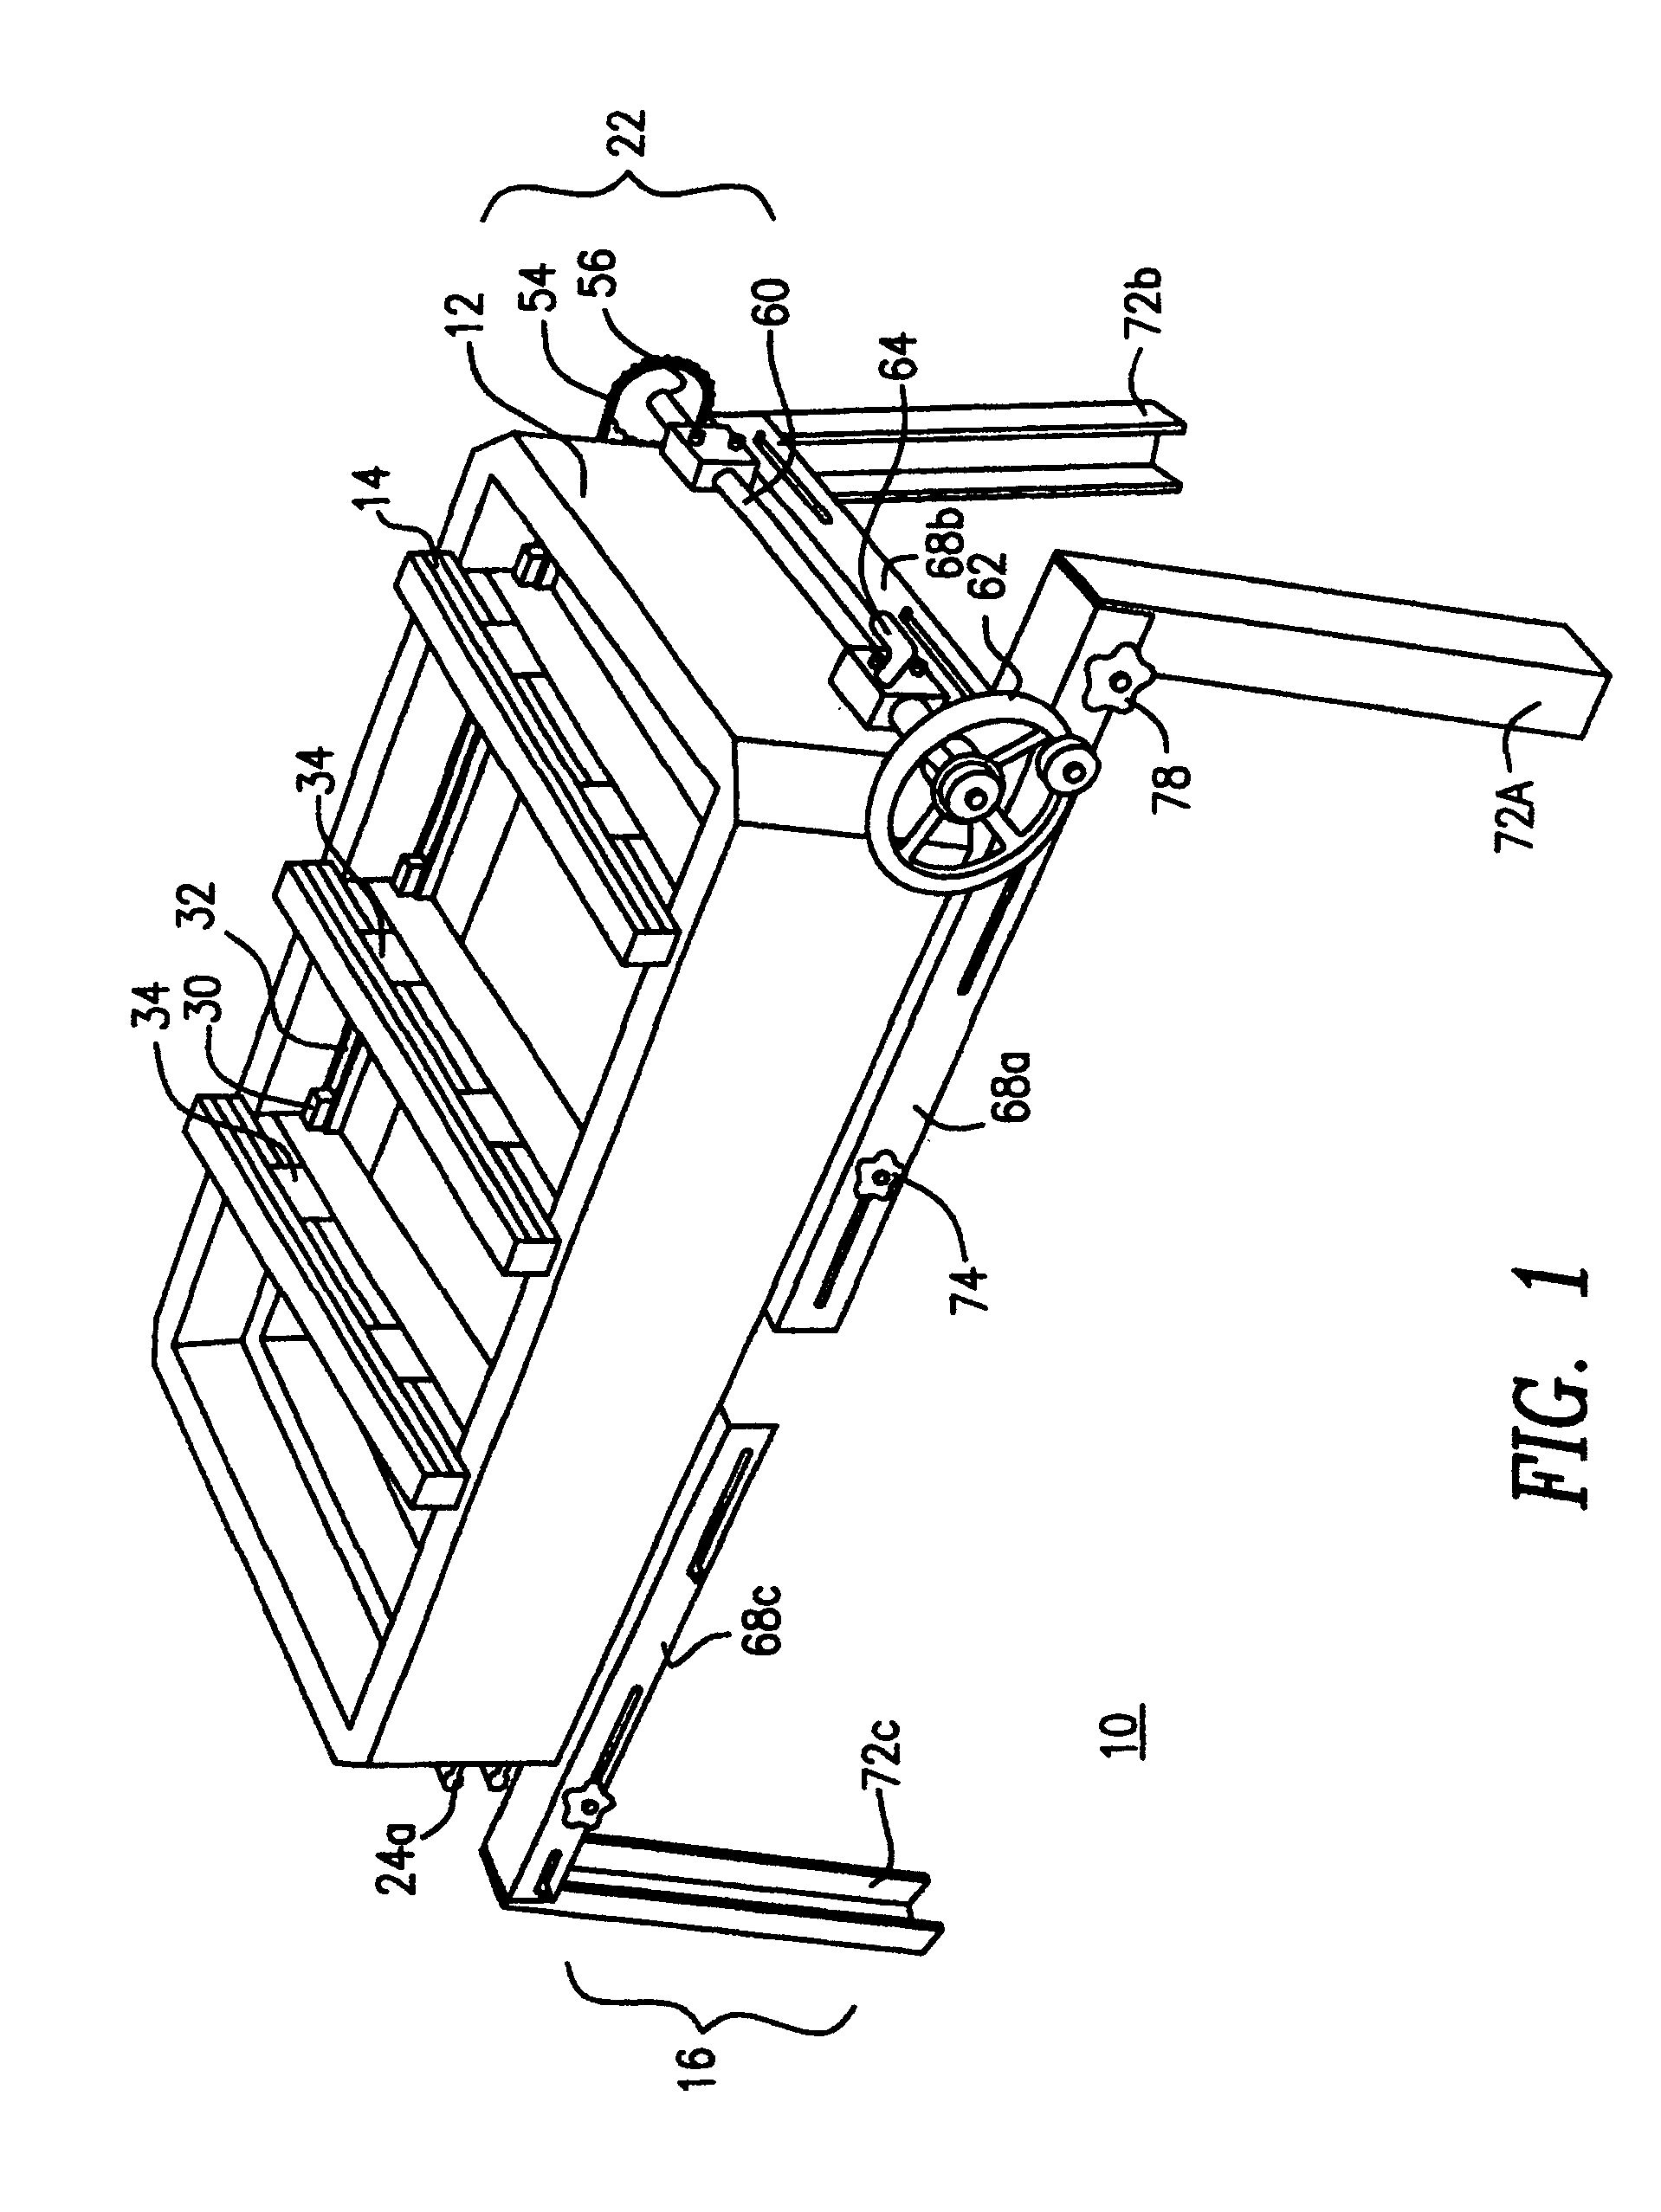 Extendable woodworking system